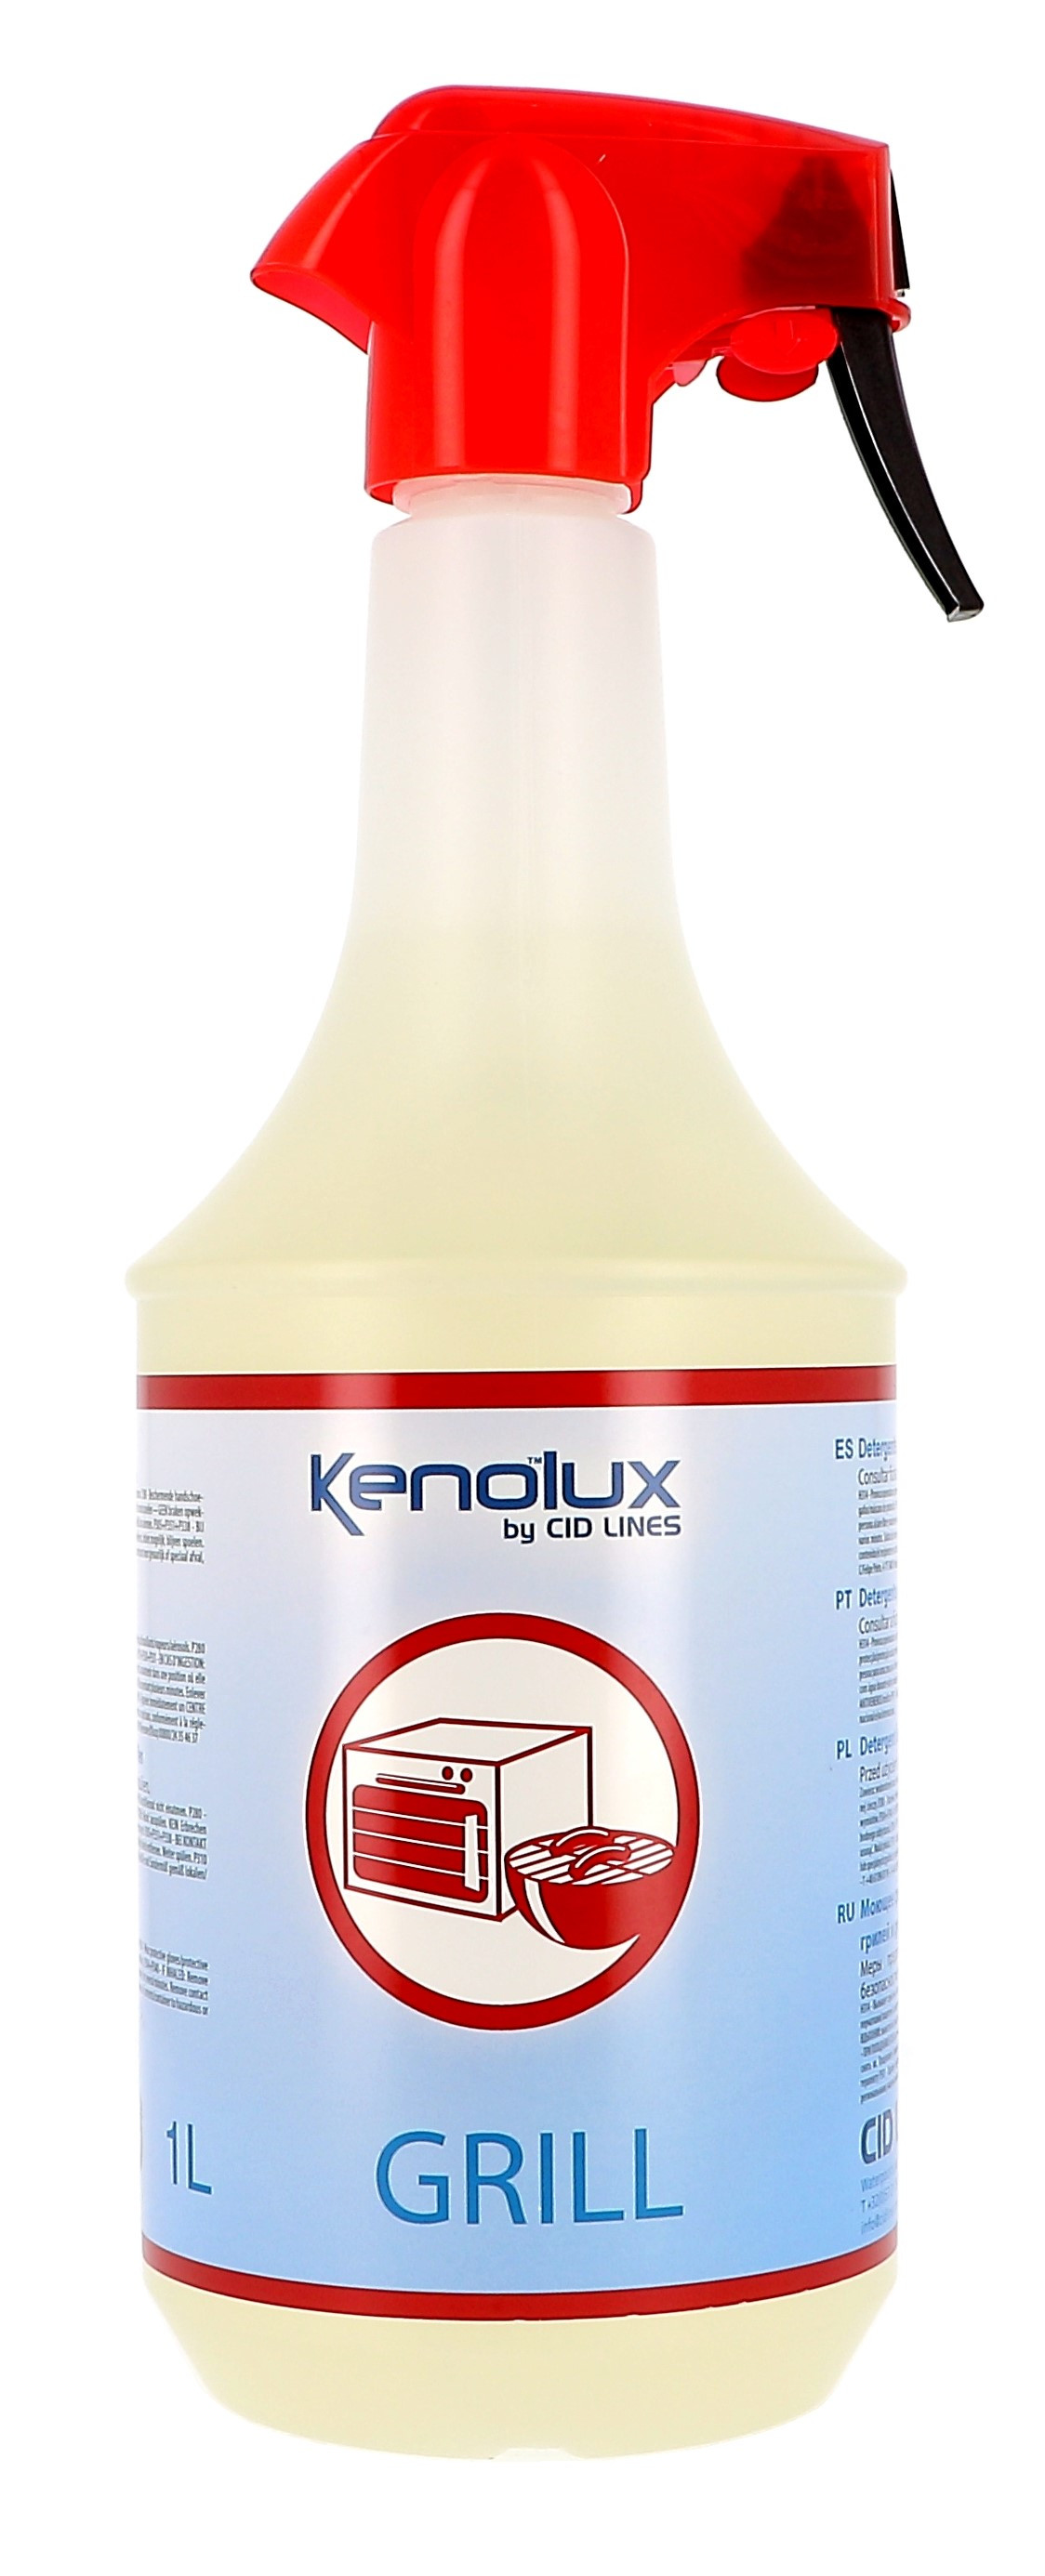 Kenolux Grill 1L CID Lines nettoyant four & grill